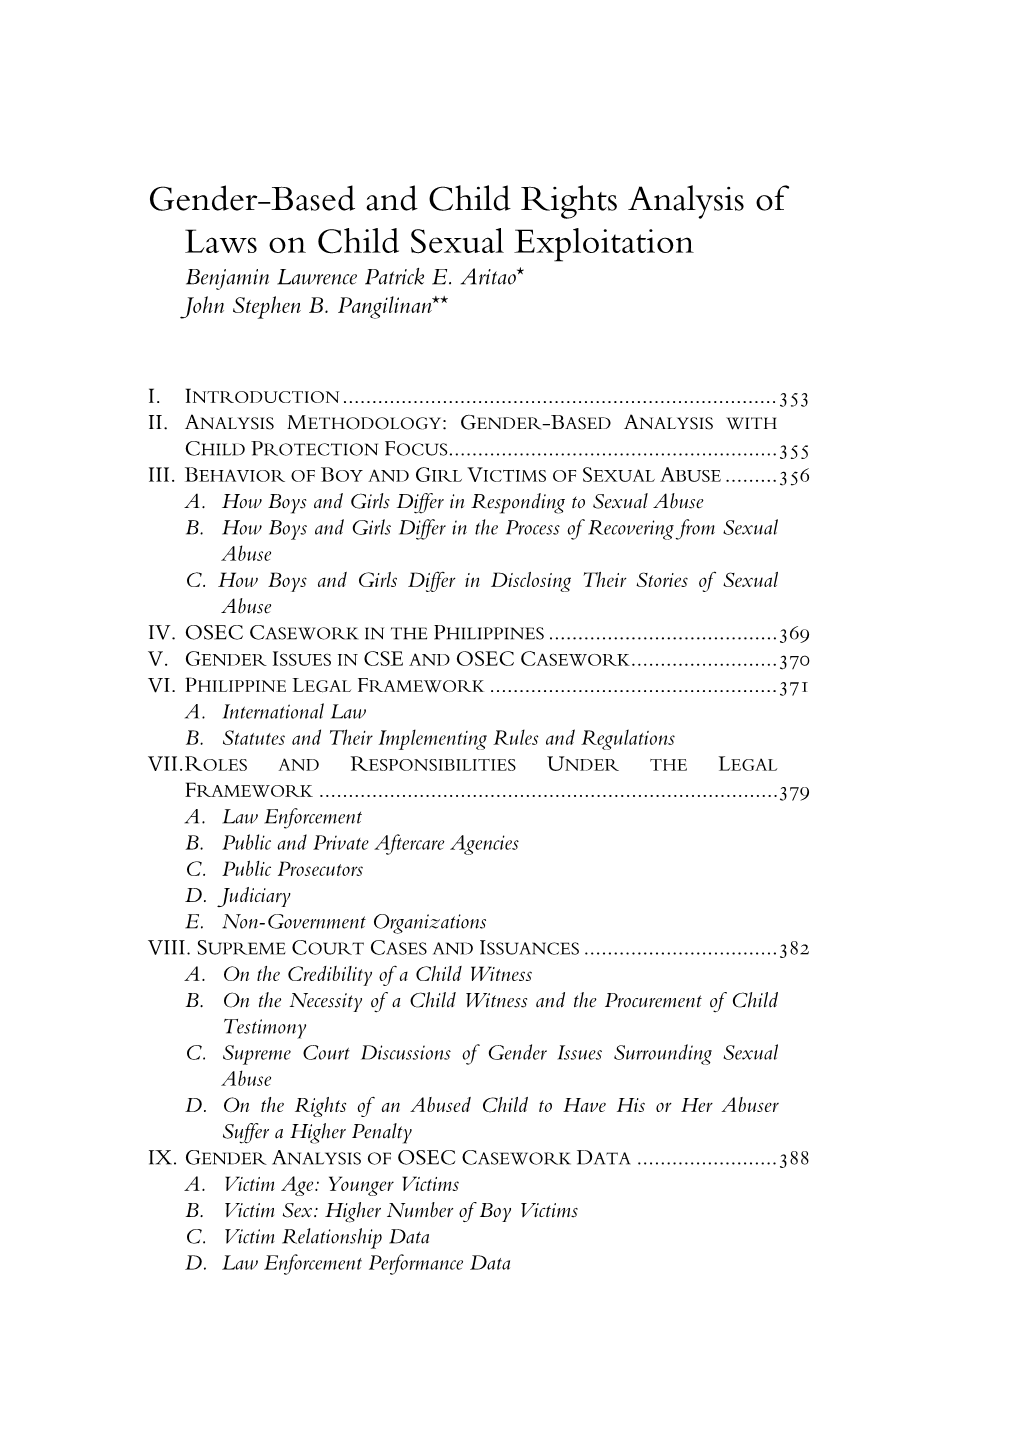 Gender-Based and Child Rights Analysis of Laws on Child Sexual Exploitation Benjamin Lawrence Patrick E